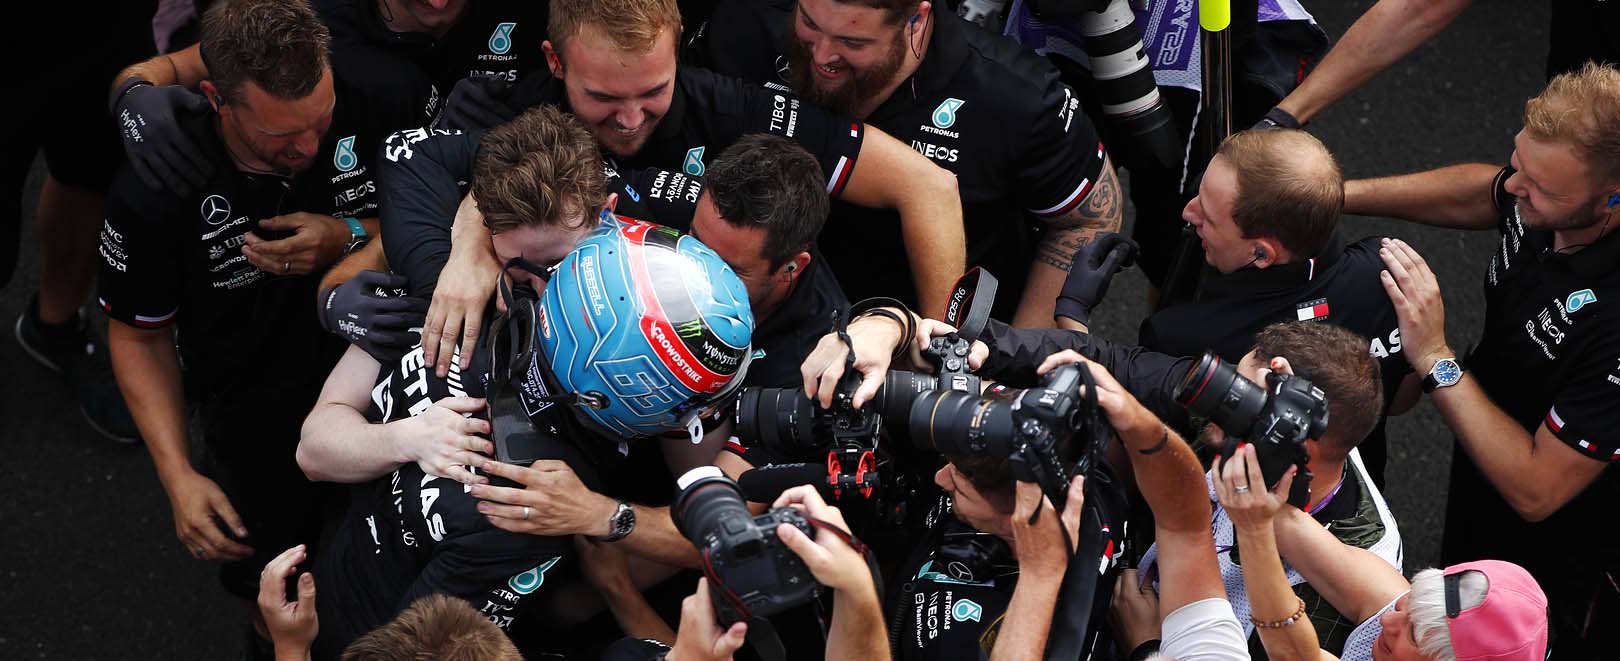 George Russell celebrating with his team after qualifying on pole position at the 2022 Hungarian Grand Prix